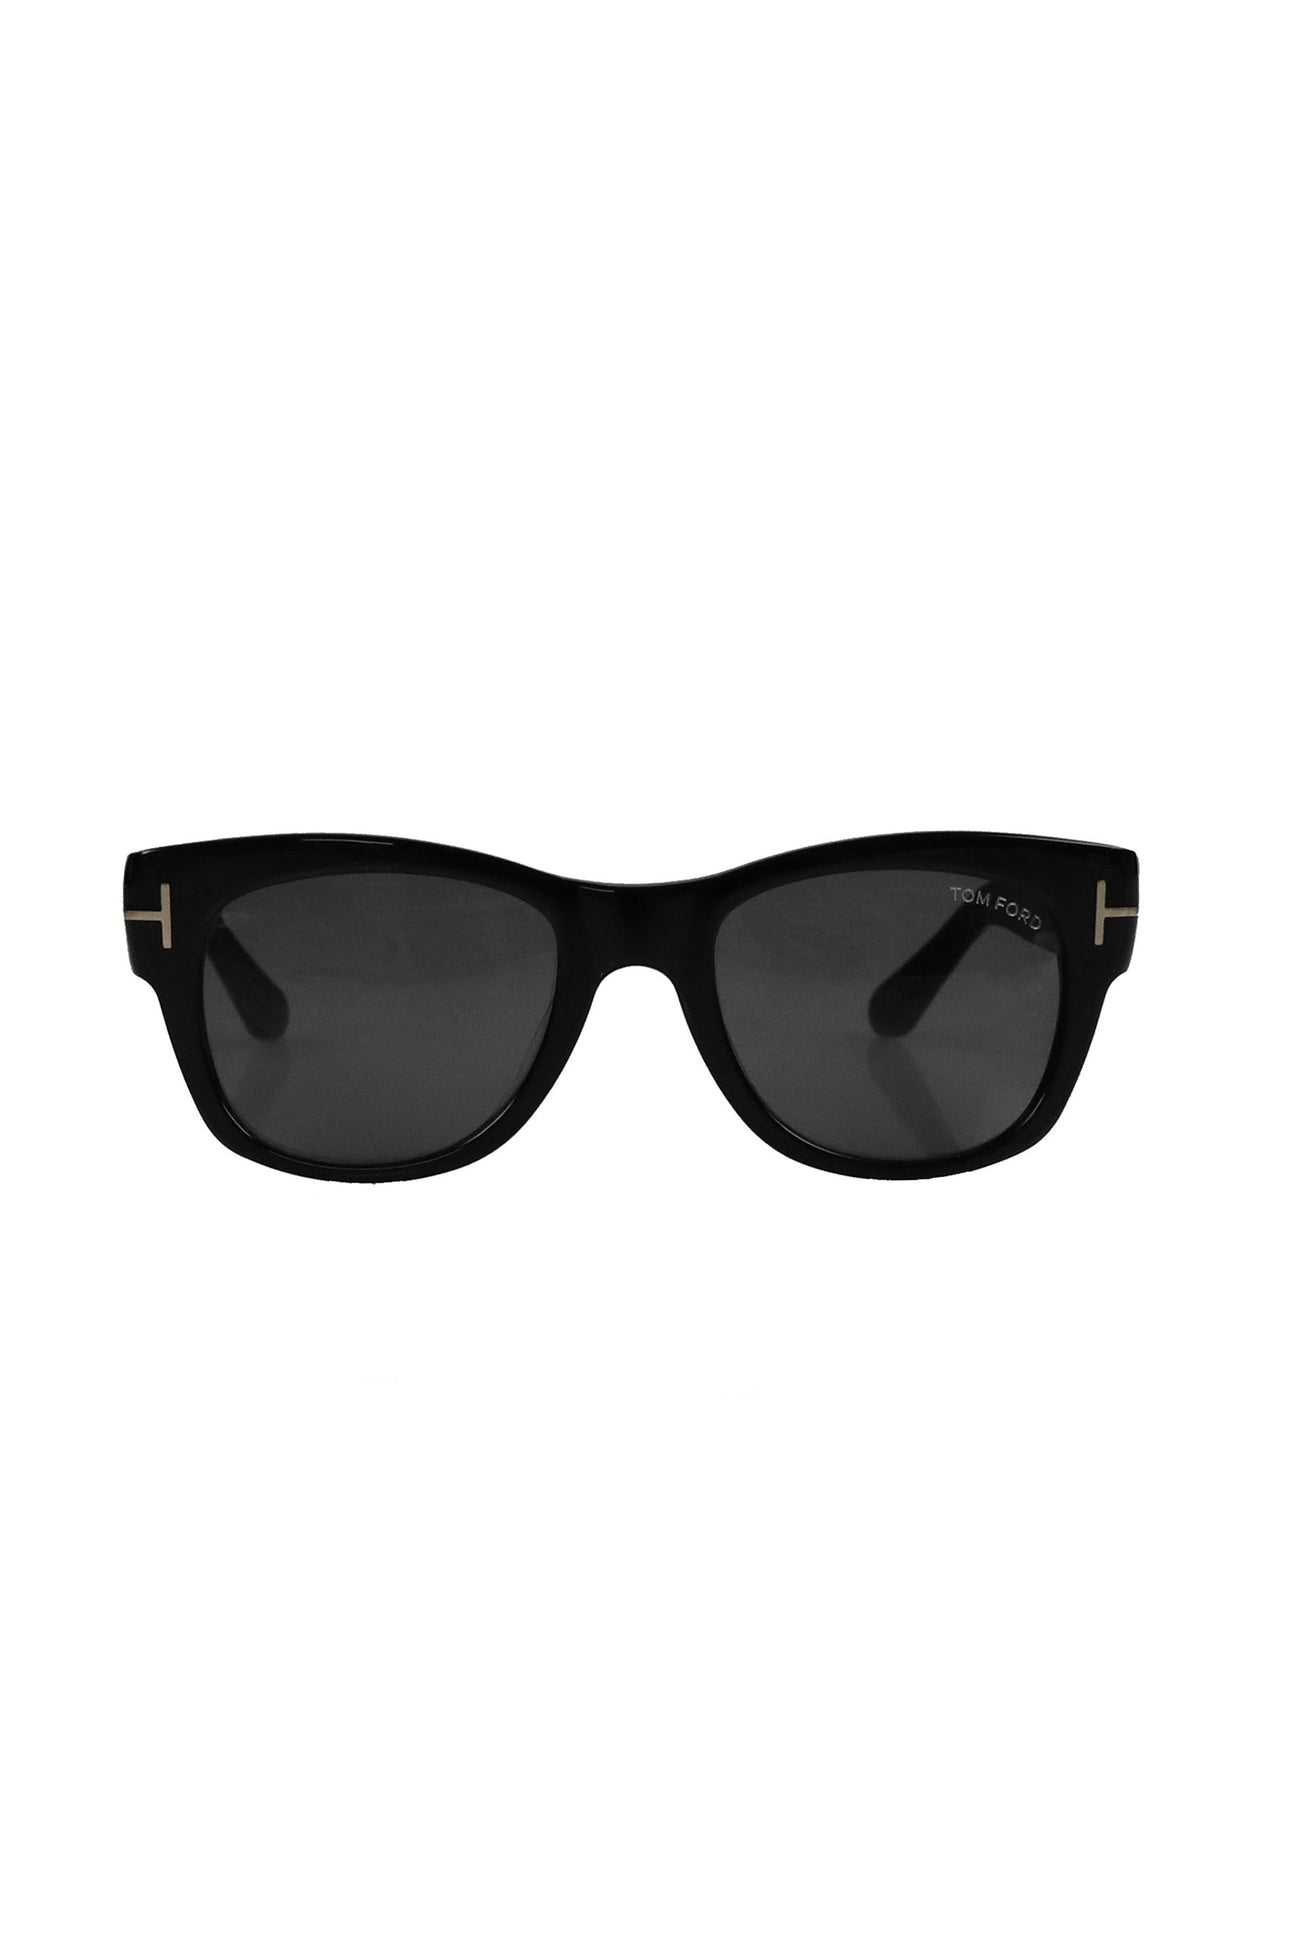 TOM FORD SS22 FT0058-F-52 / 01A - NUBIAN